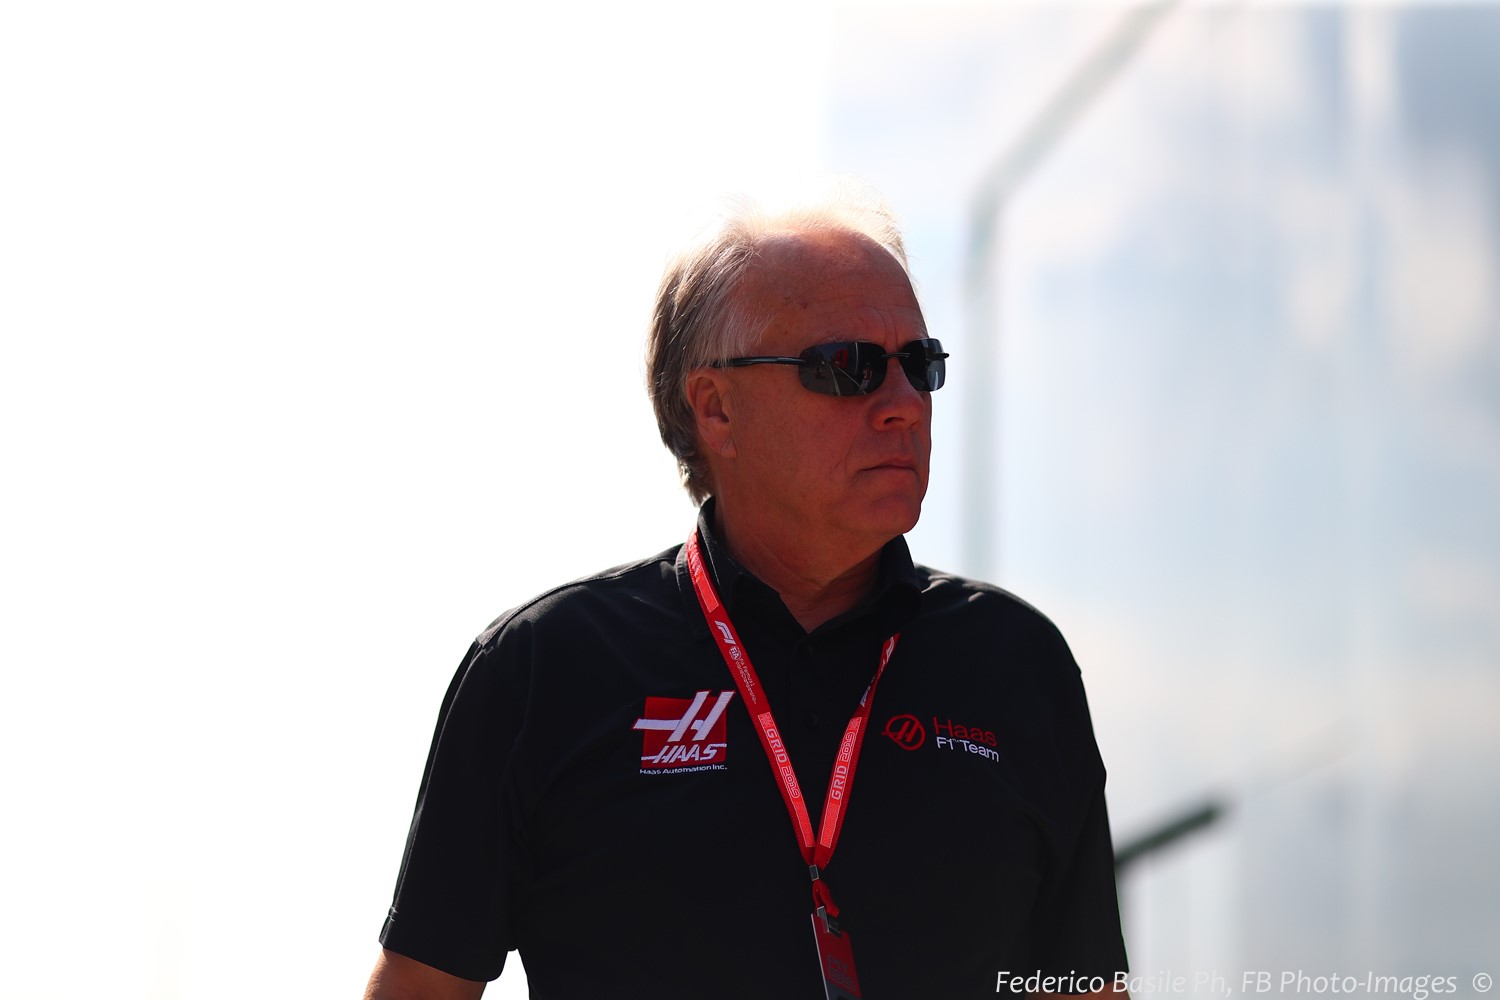 Is there another Gene Haas in the USA willing to lose $ billions to field an F1 team?